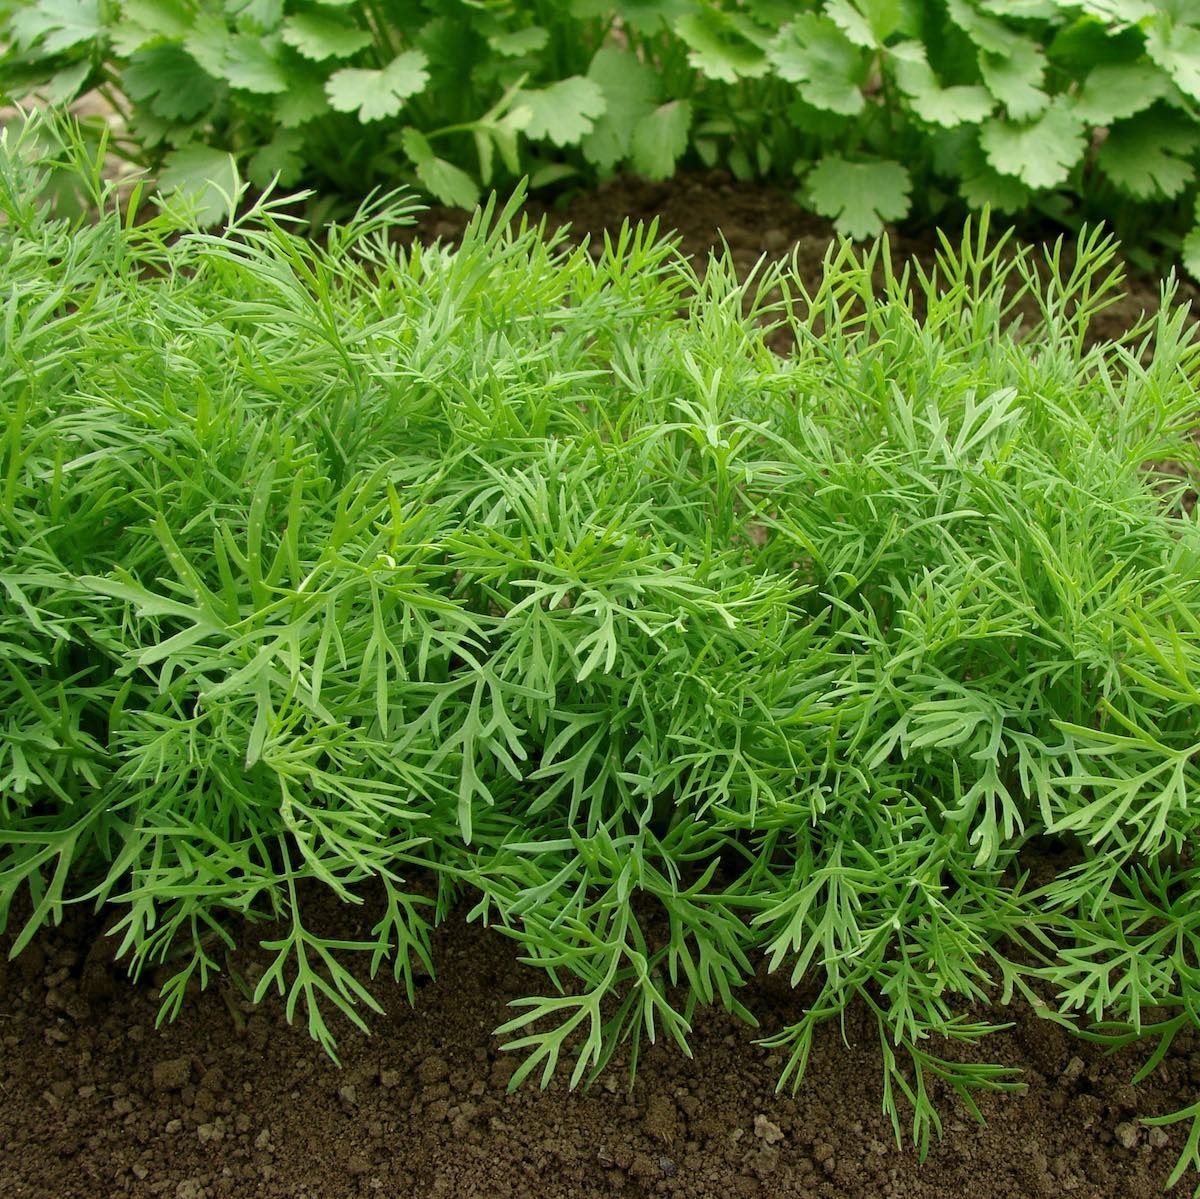 dill growing in a vegetable bed